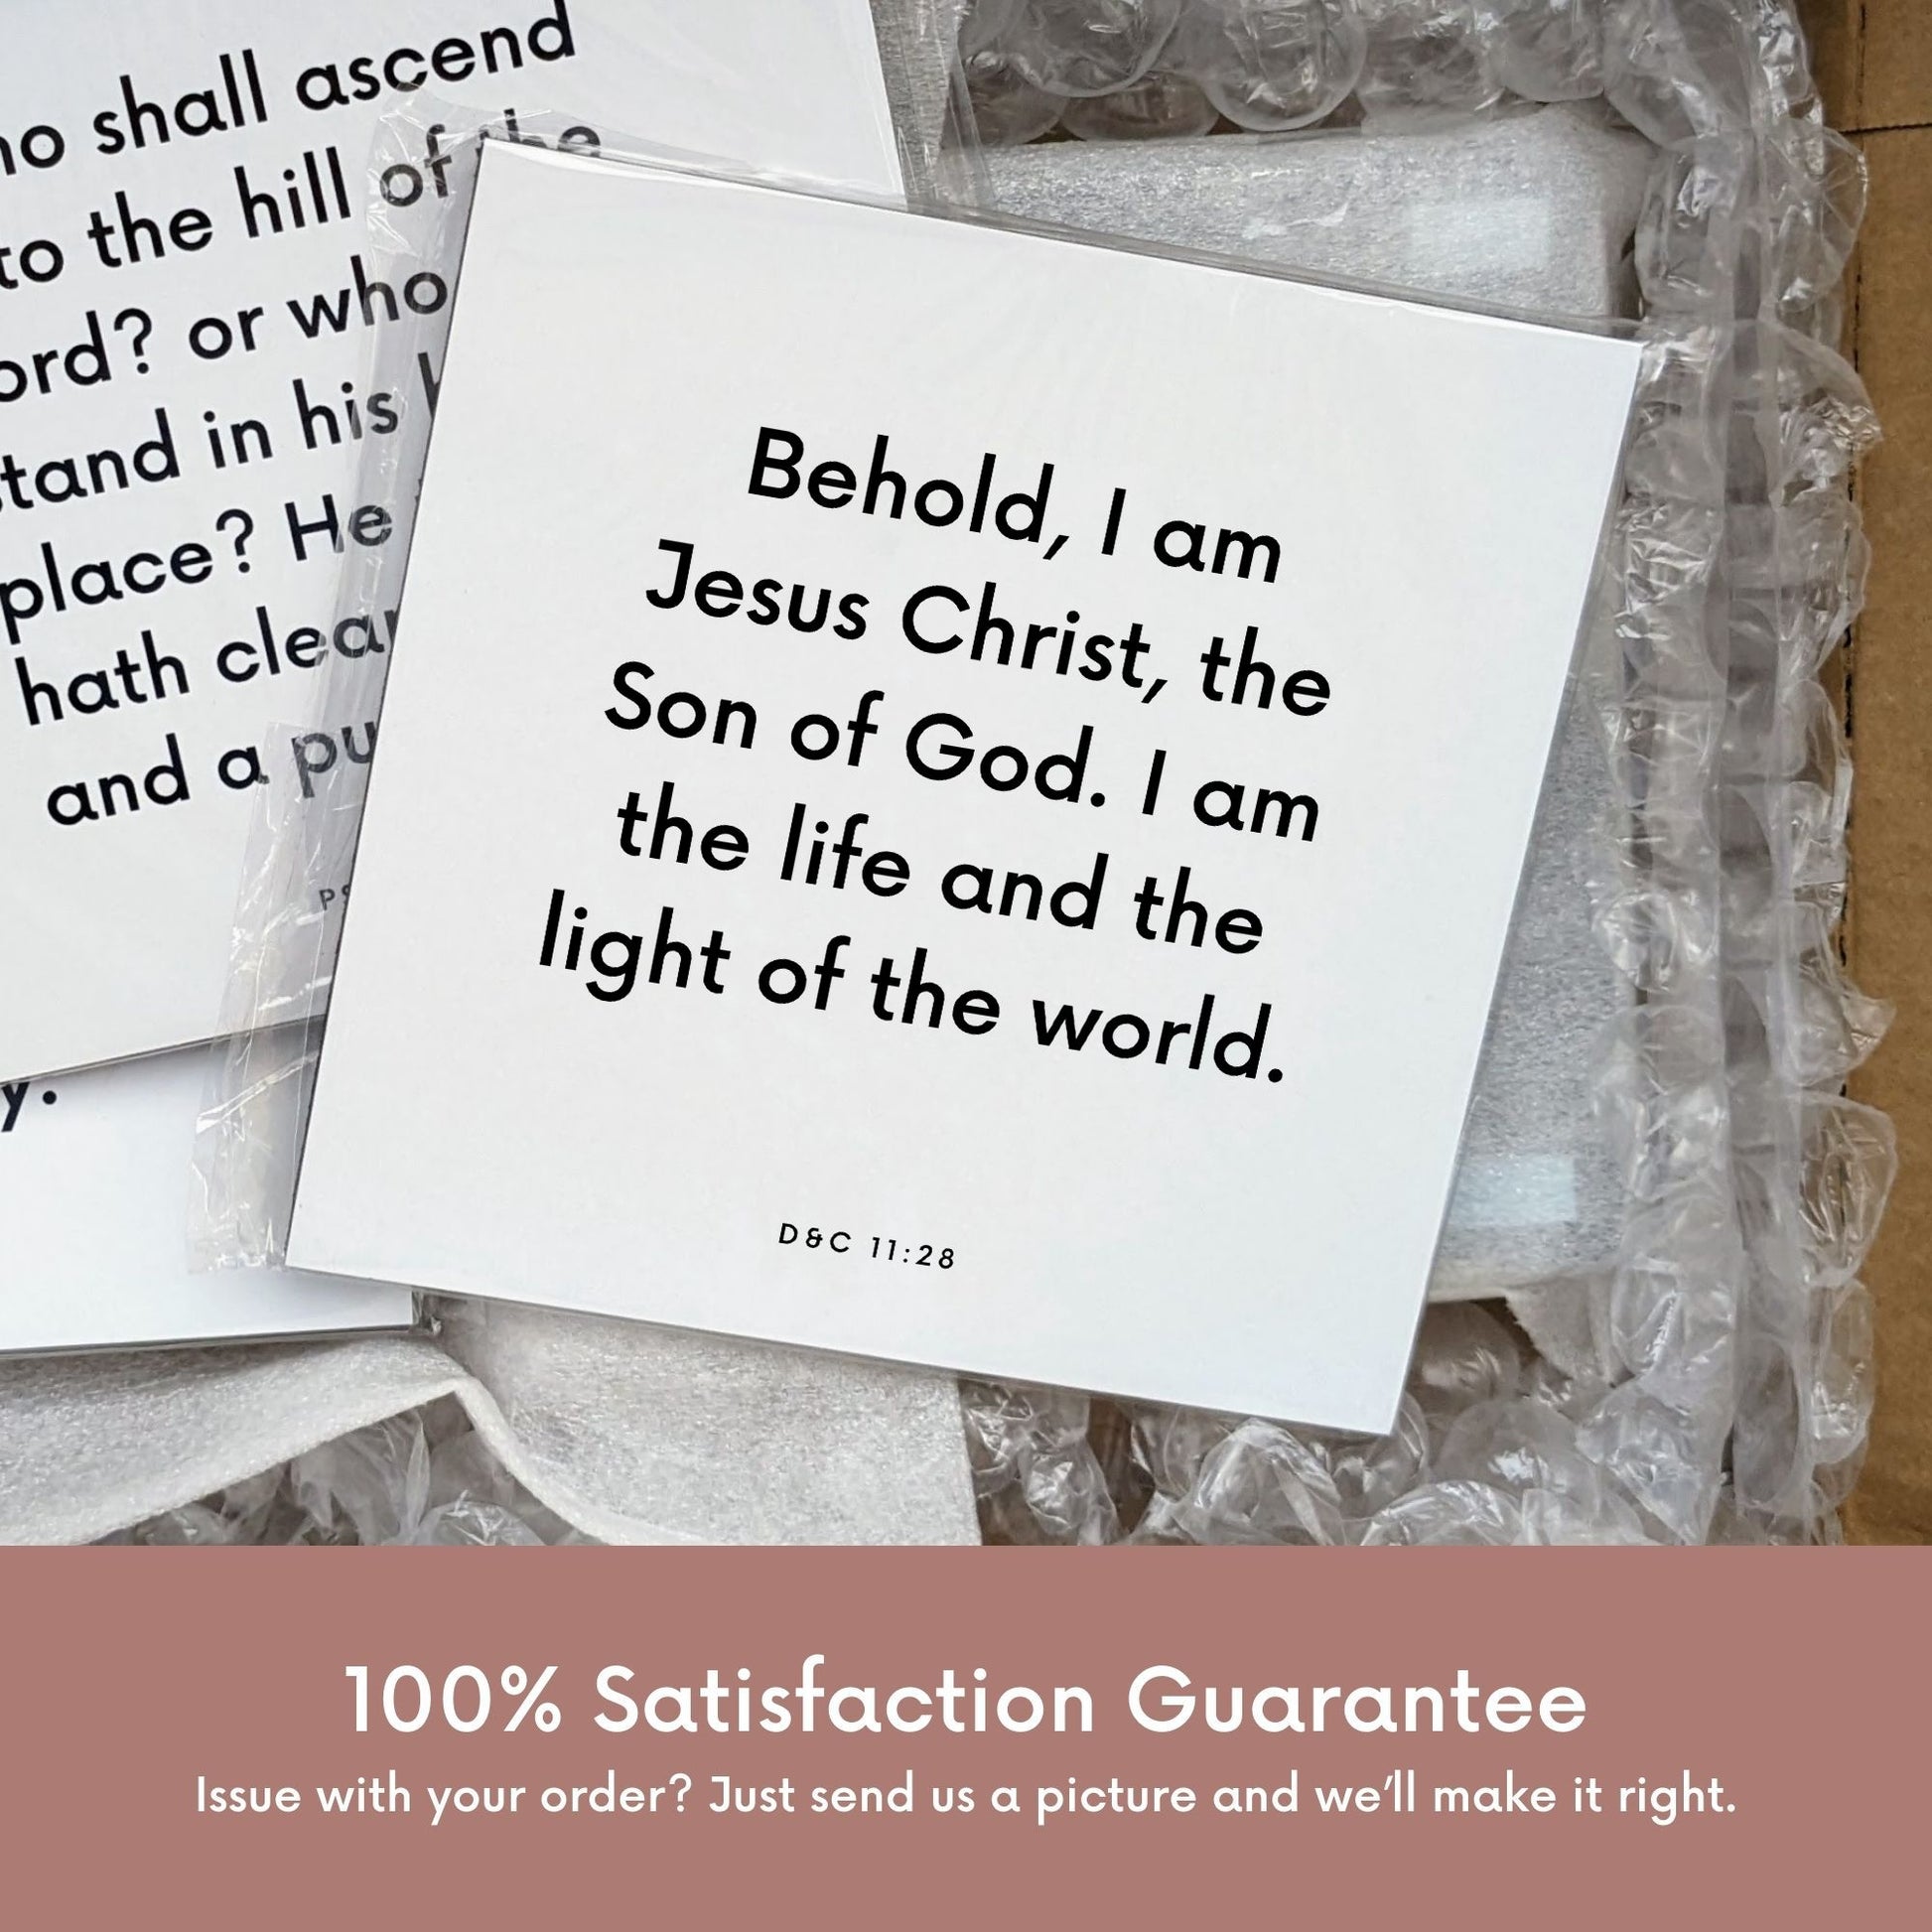 Shipping materials for scripture tile of D&C 11:28 - "Behold, I am Jesus Christ, the Son of God"